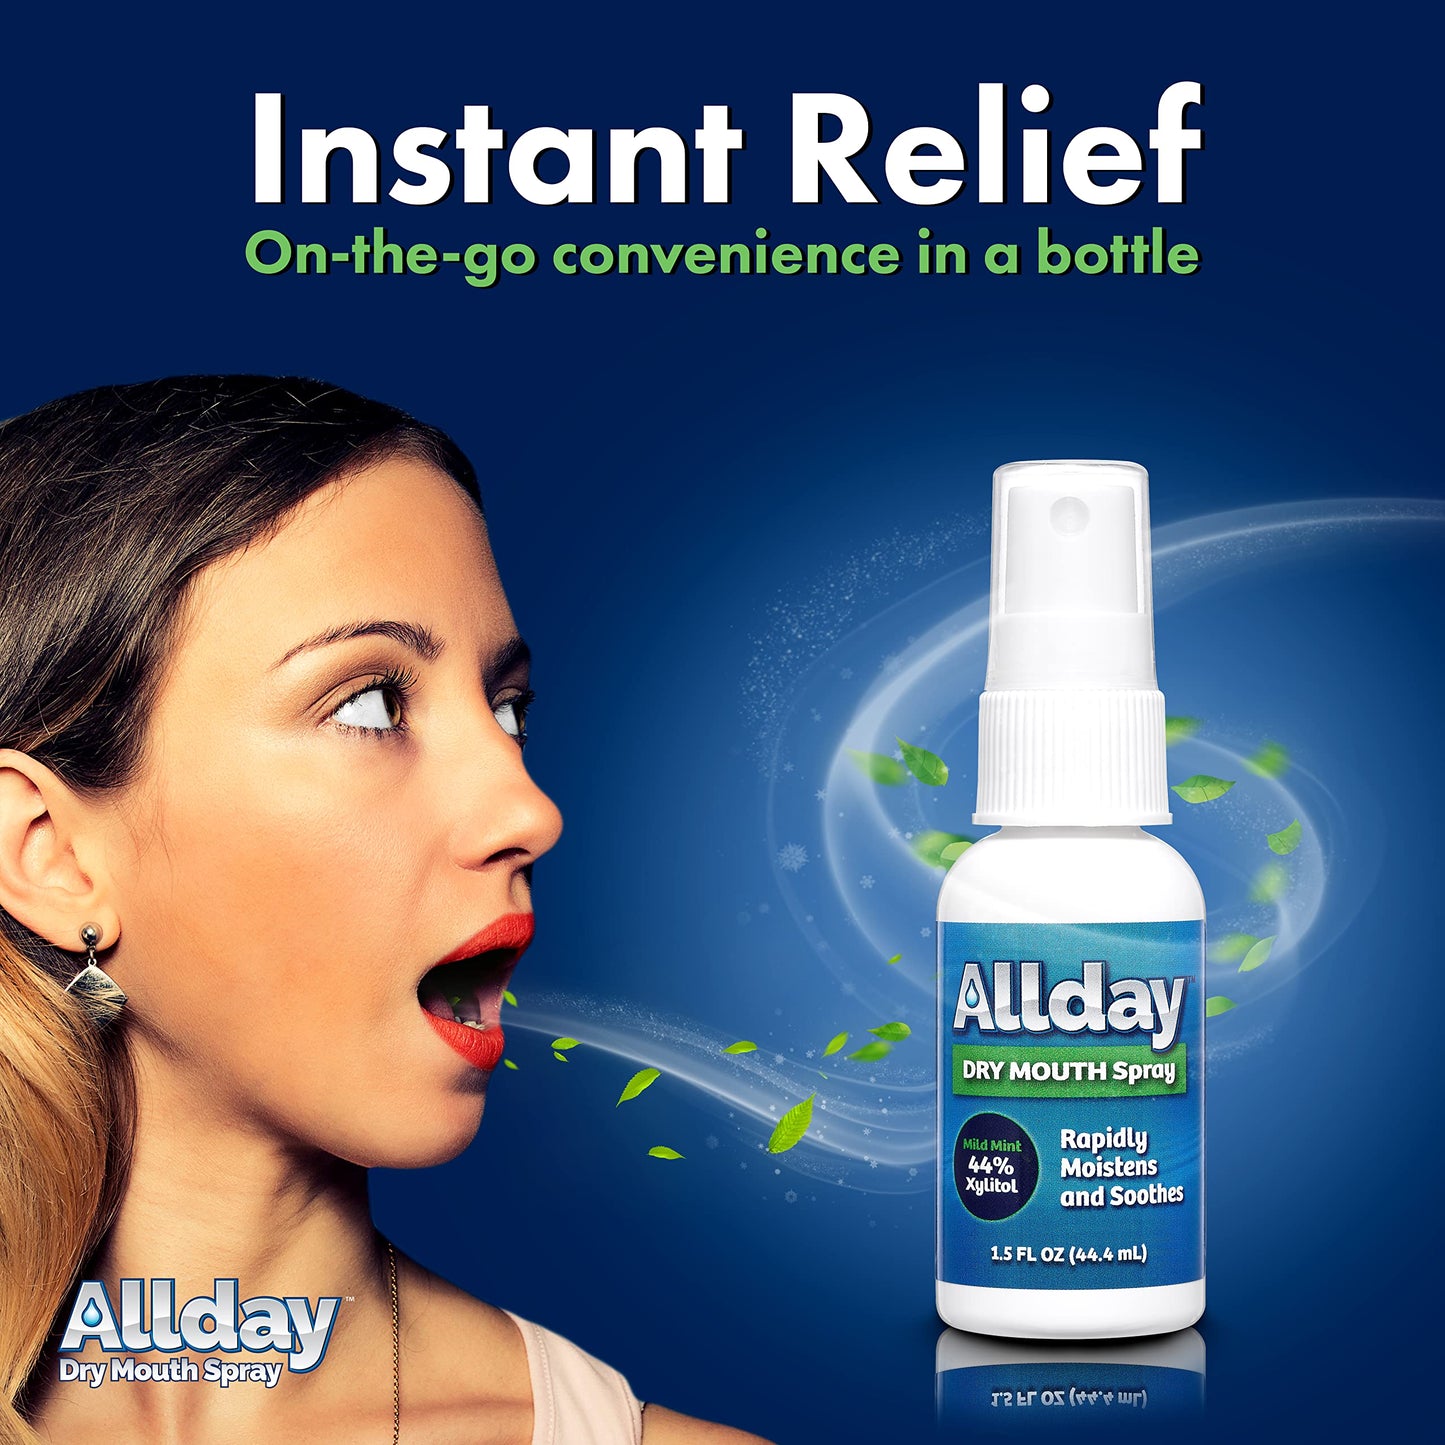 Allday Dry Mouth Spray - Maximum Strength Xylitol, Fast Acting, Non-Acidic (Pack of 2)